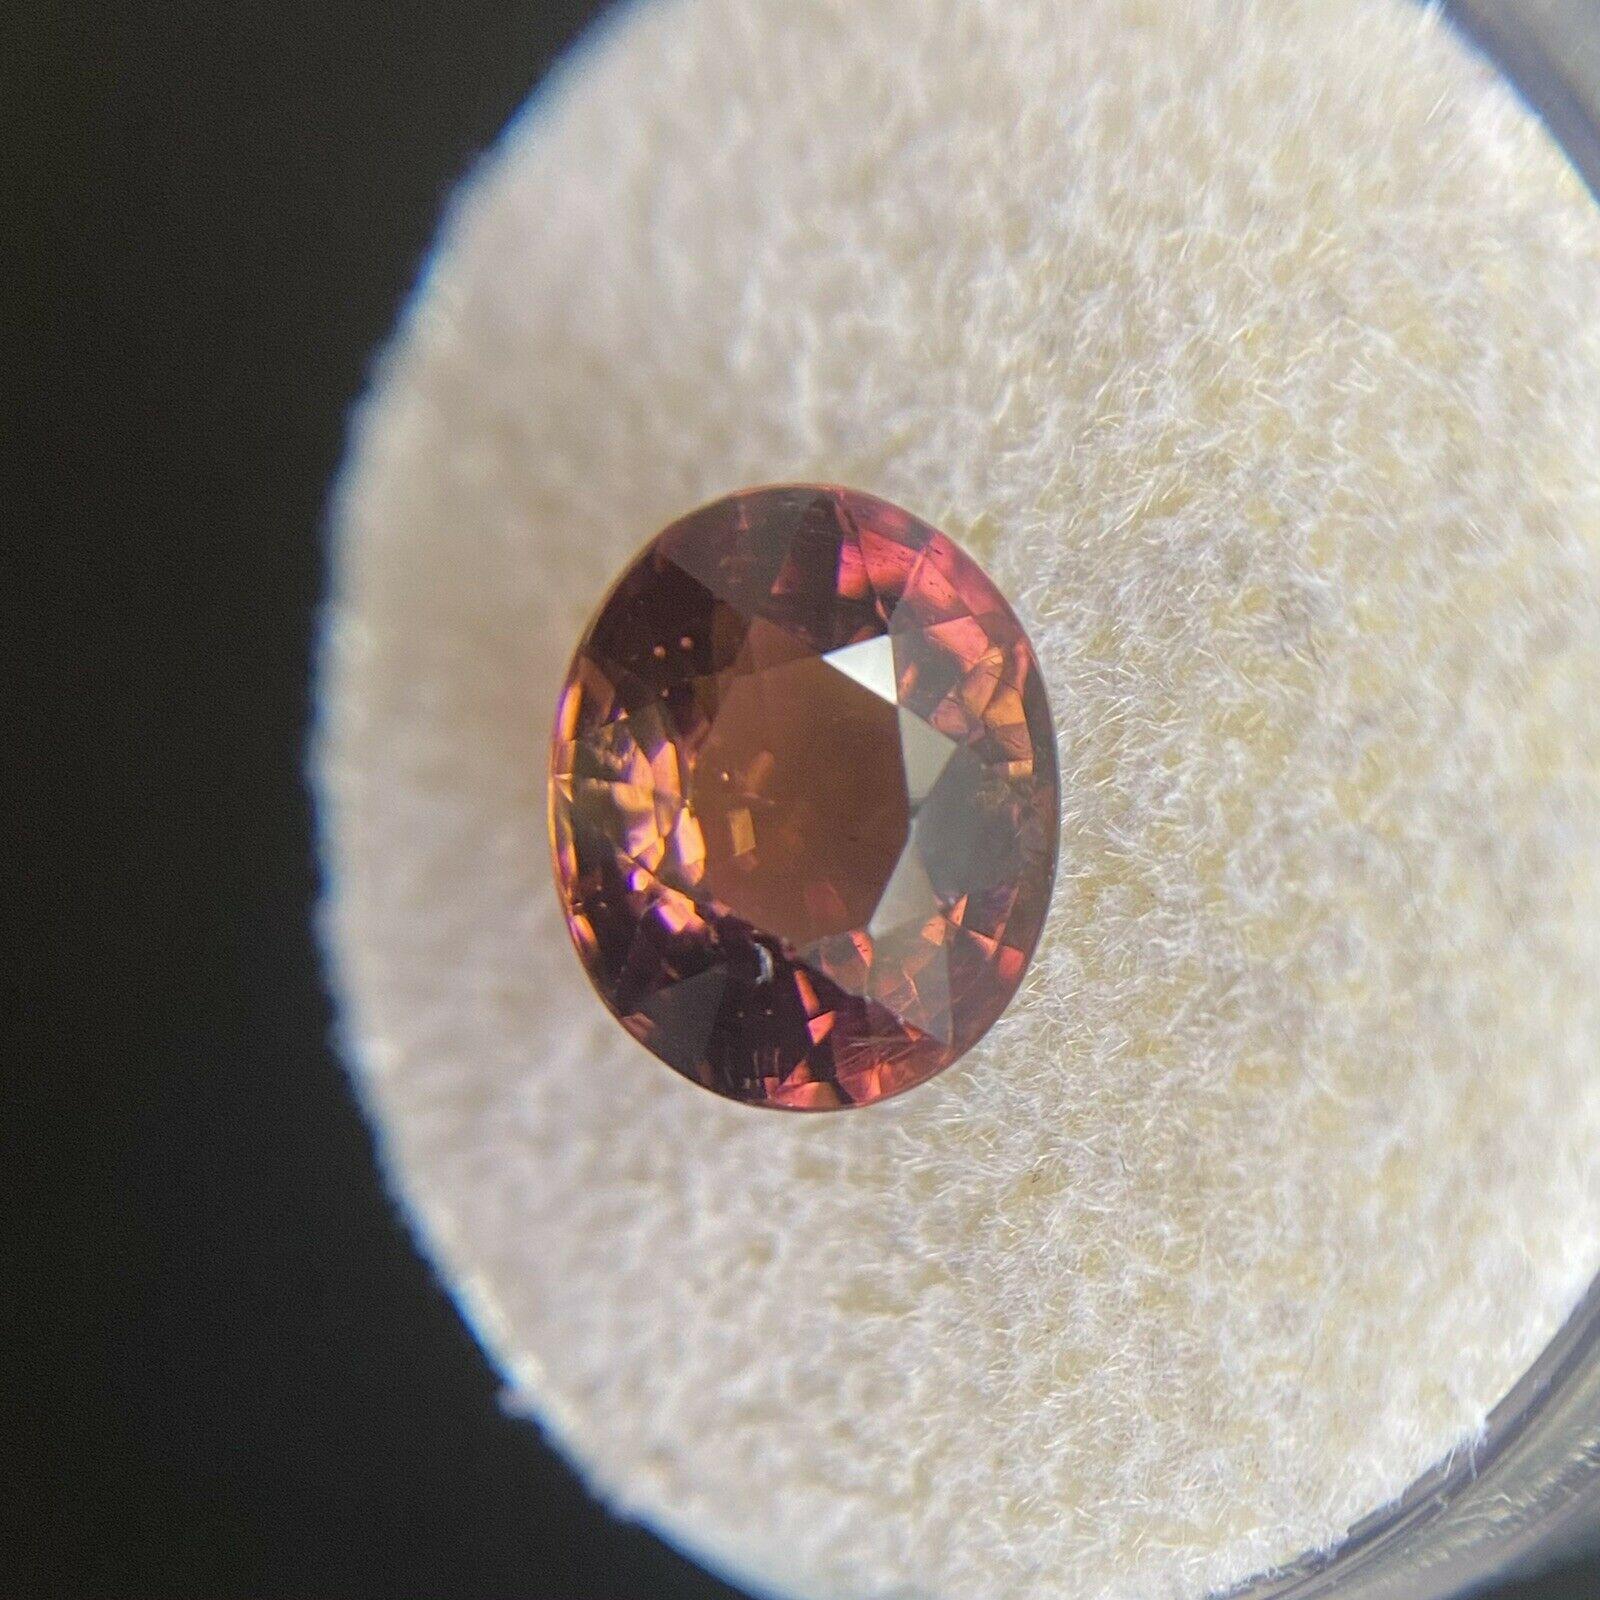 Fine Vivid Pink Purple Tourmaline 3.23ct Oval Cut Loose Gem 10 x 8.3mm

Fine Pink Purple Tourmaline Gemstone. 
3.23 Carat with a beautiful vivid pink purple colour and good clarity, a clean stone with only some small natural inclusions visible when